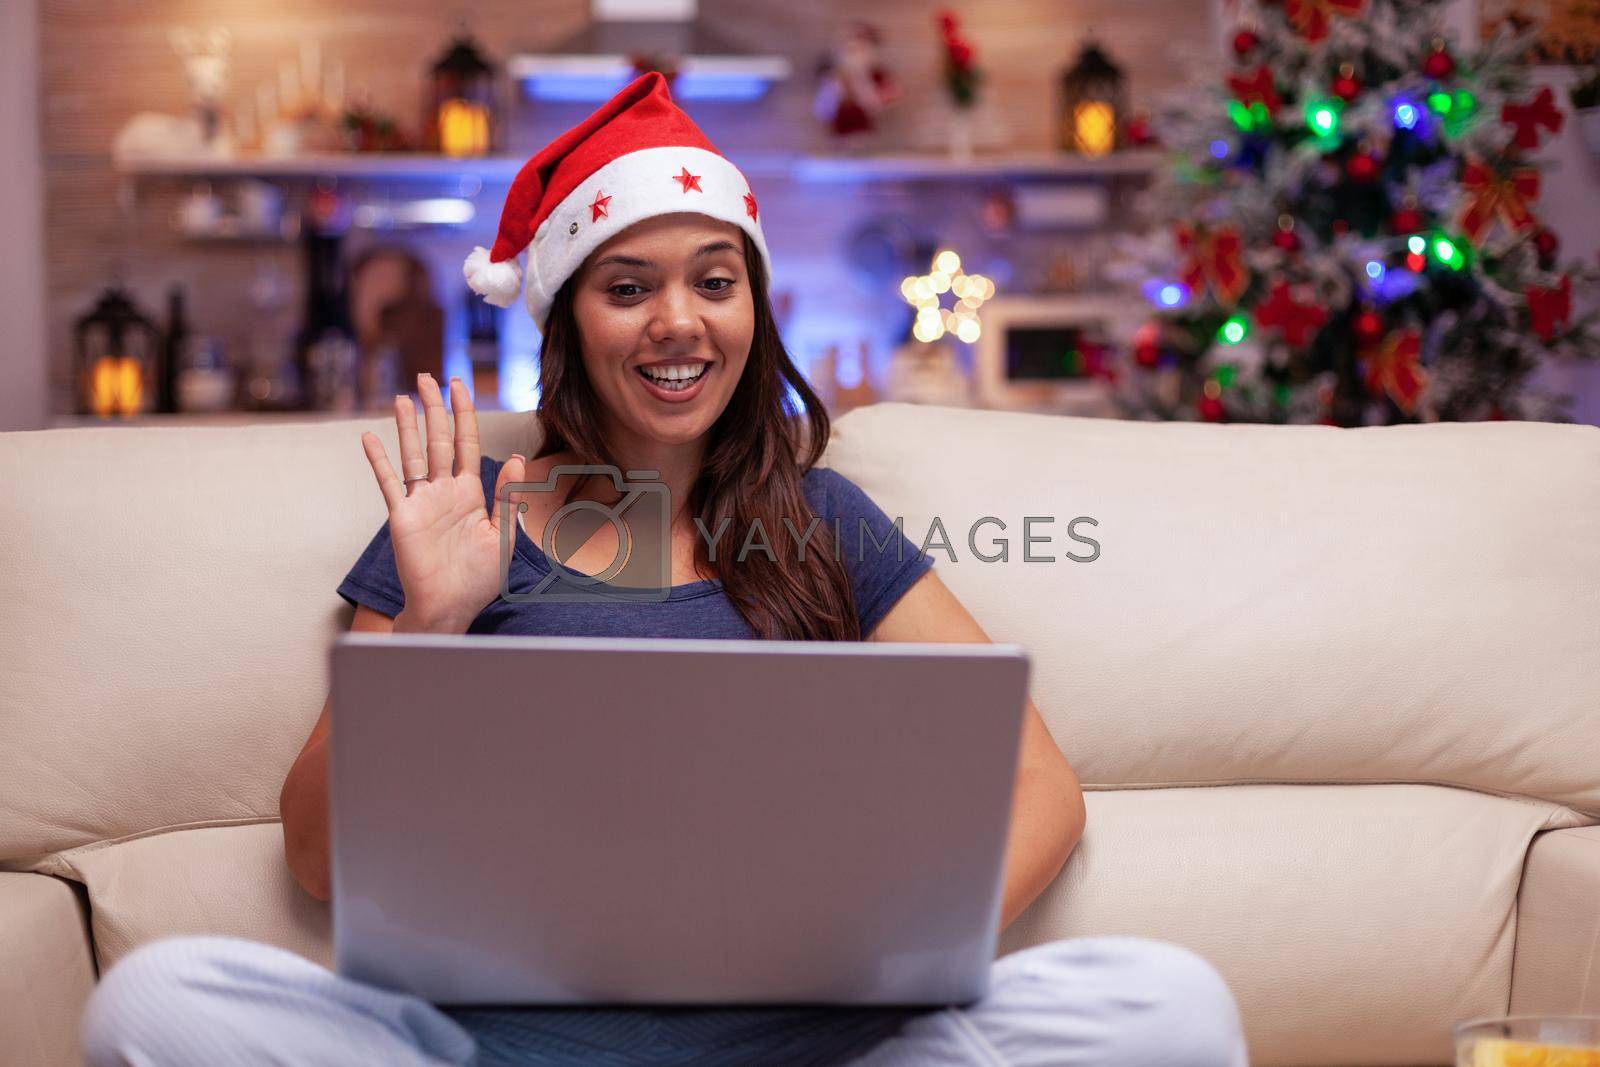 Royalty free image of Smiling woman greeting remote friends enjoying christmastime together by DCStudio